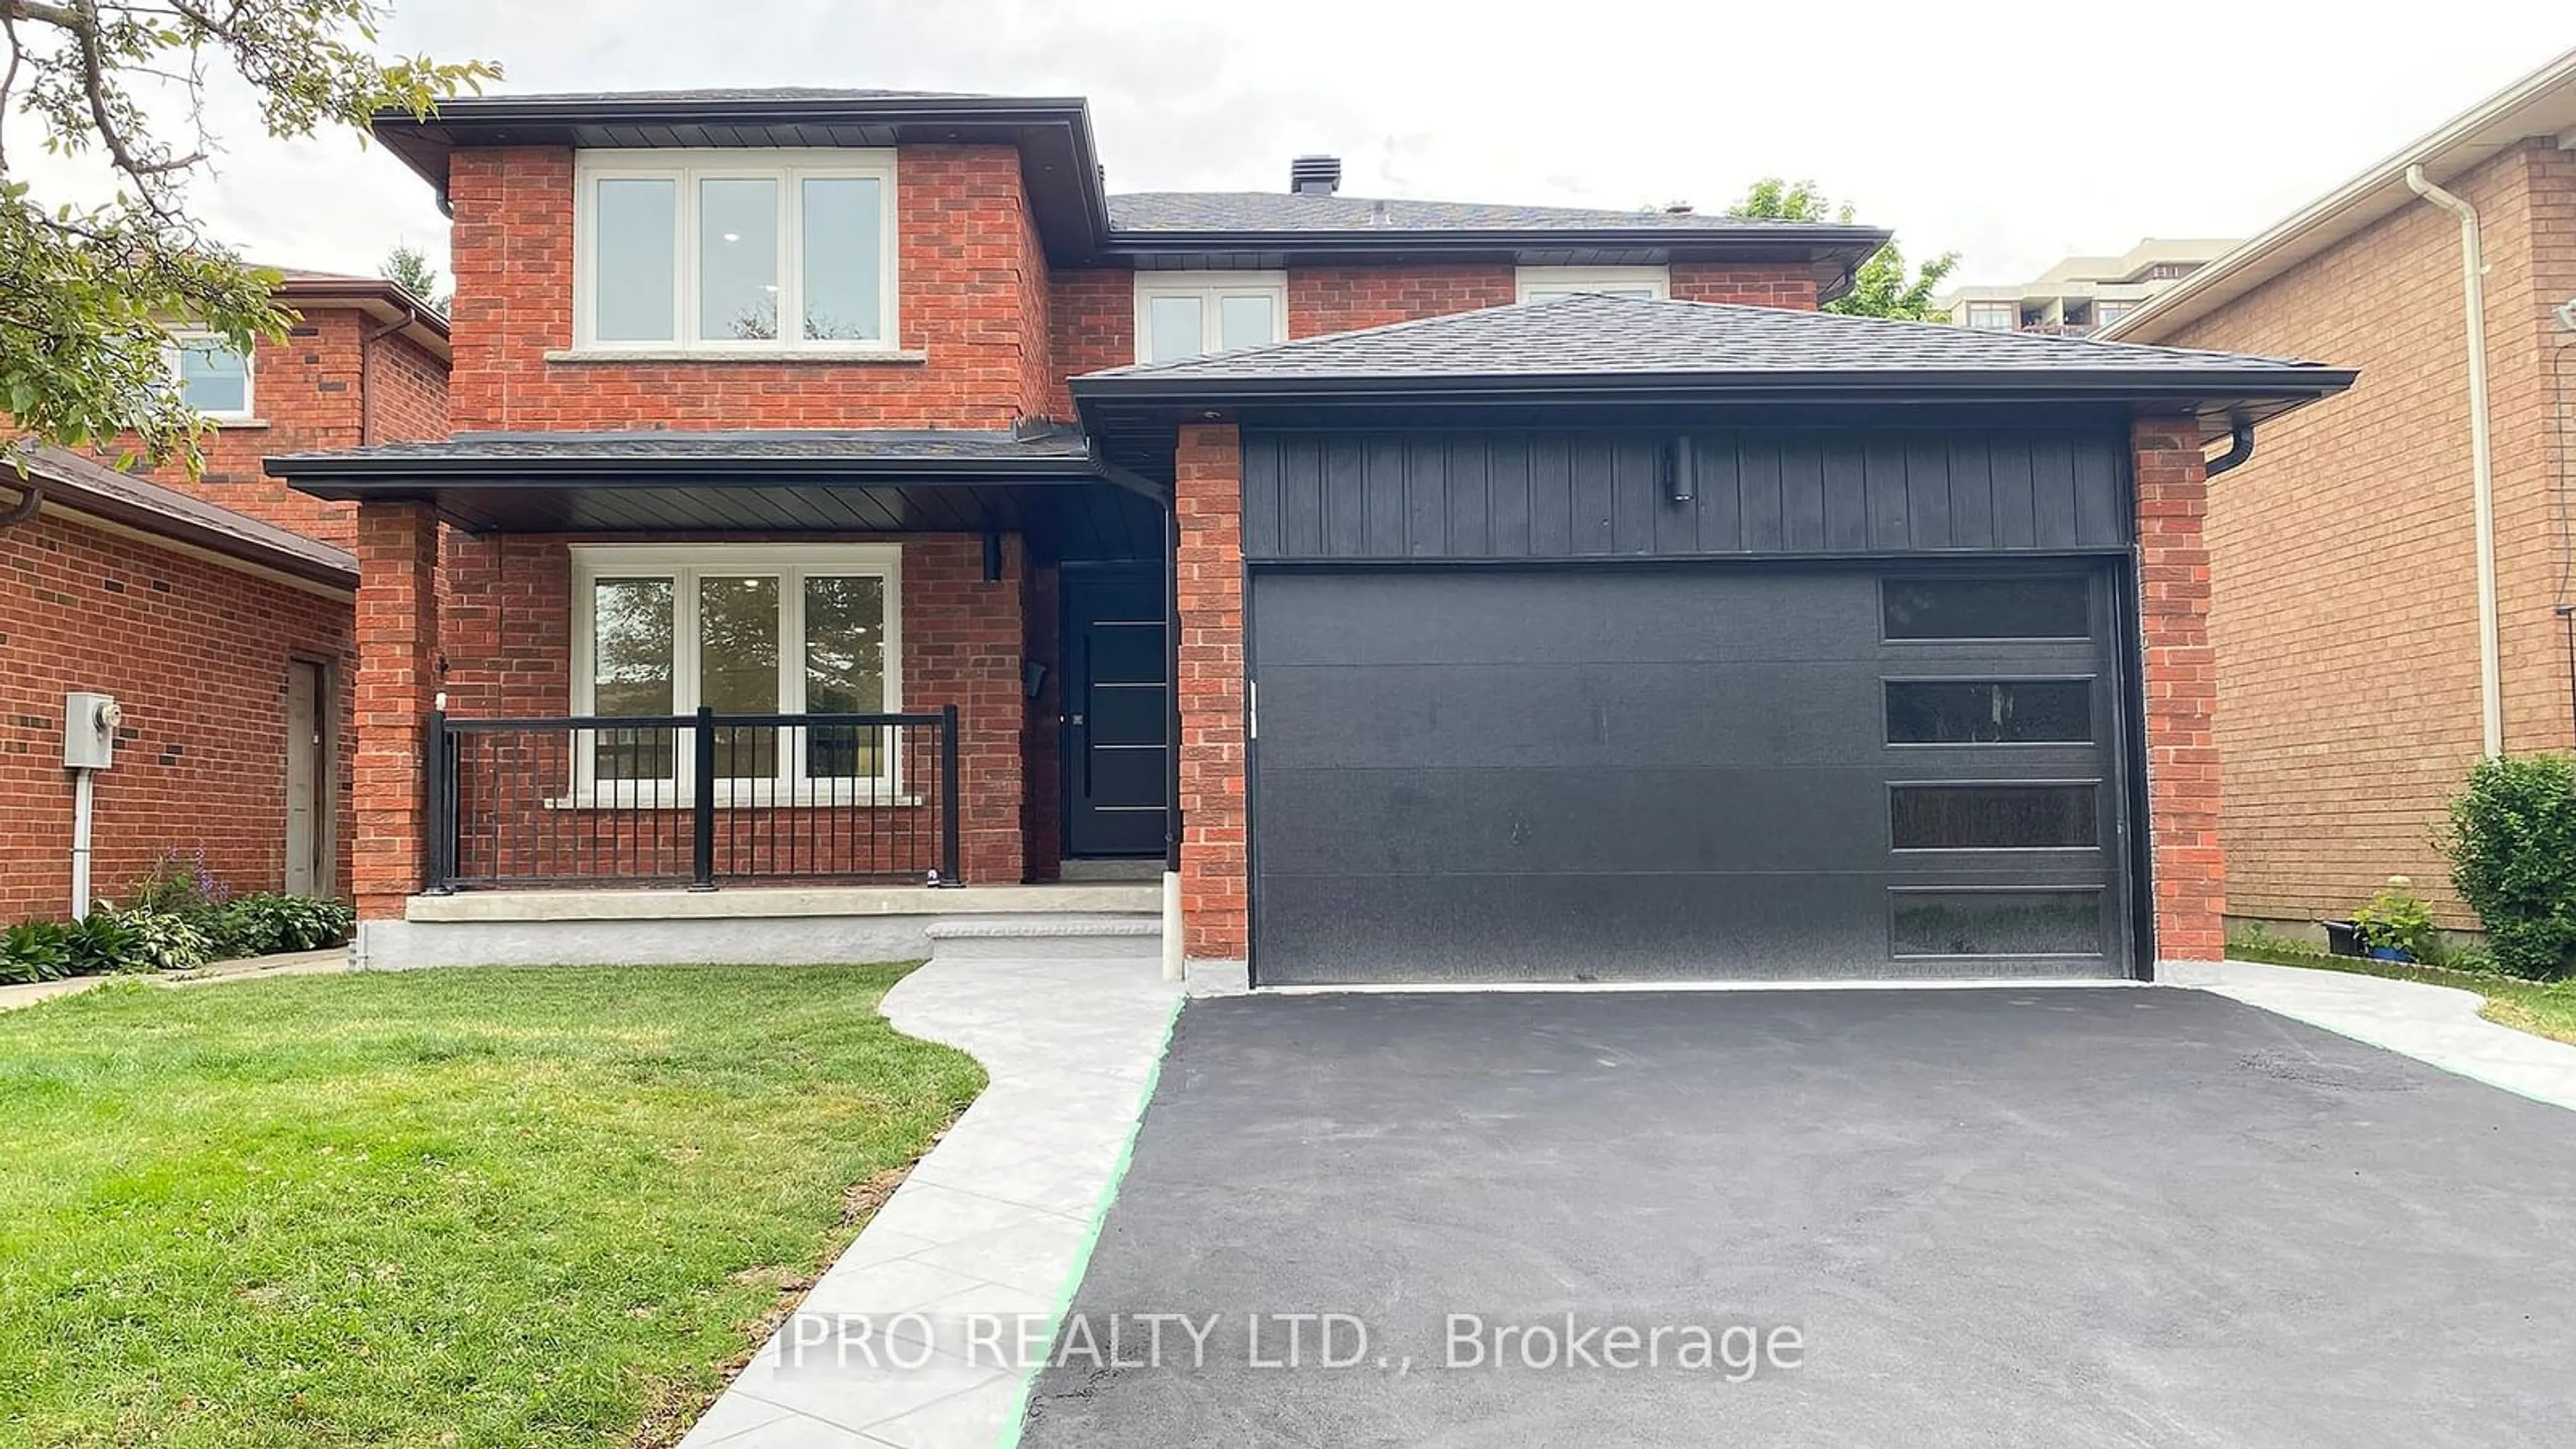 Home with brick exterior material for 255 Consulate Rd, Mississauga Ontario L5B 3E7